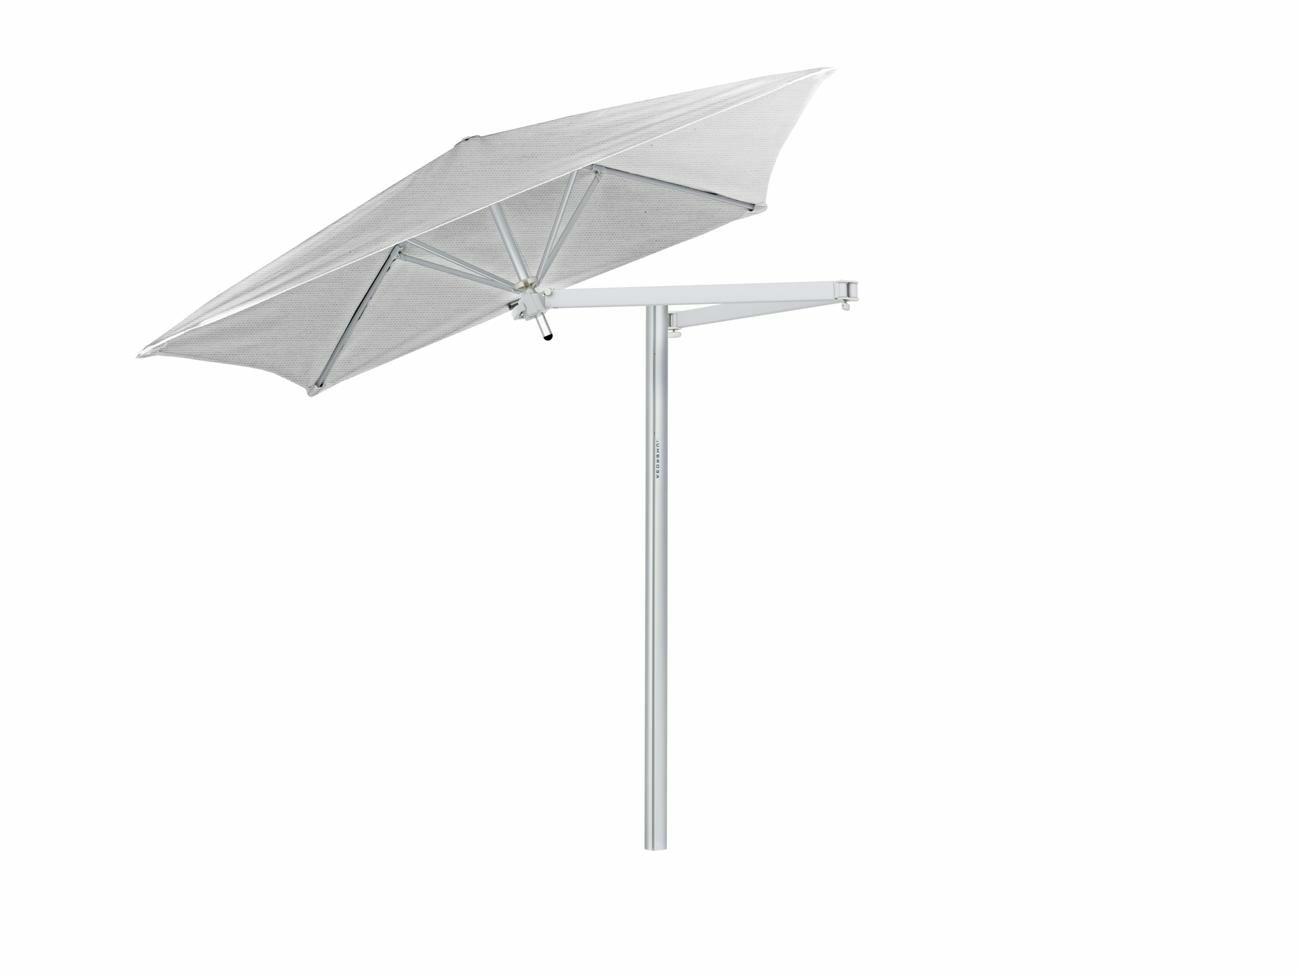 Paraflex cantilever umbrella square 1,9 m with Marble fabric and a Neo arm